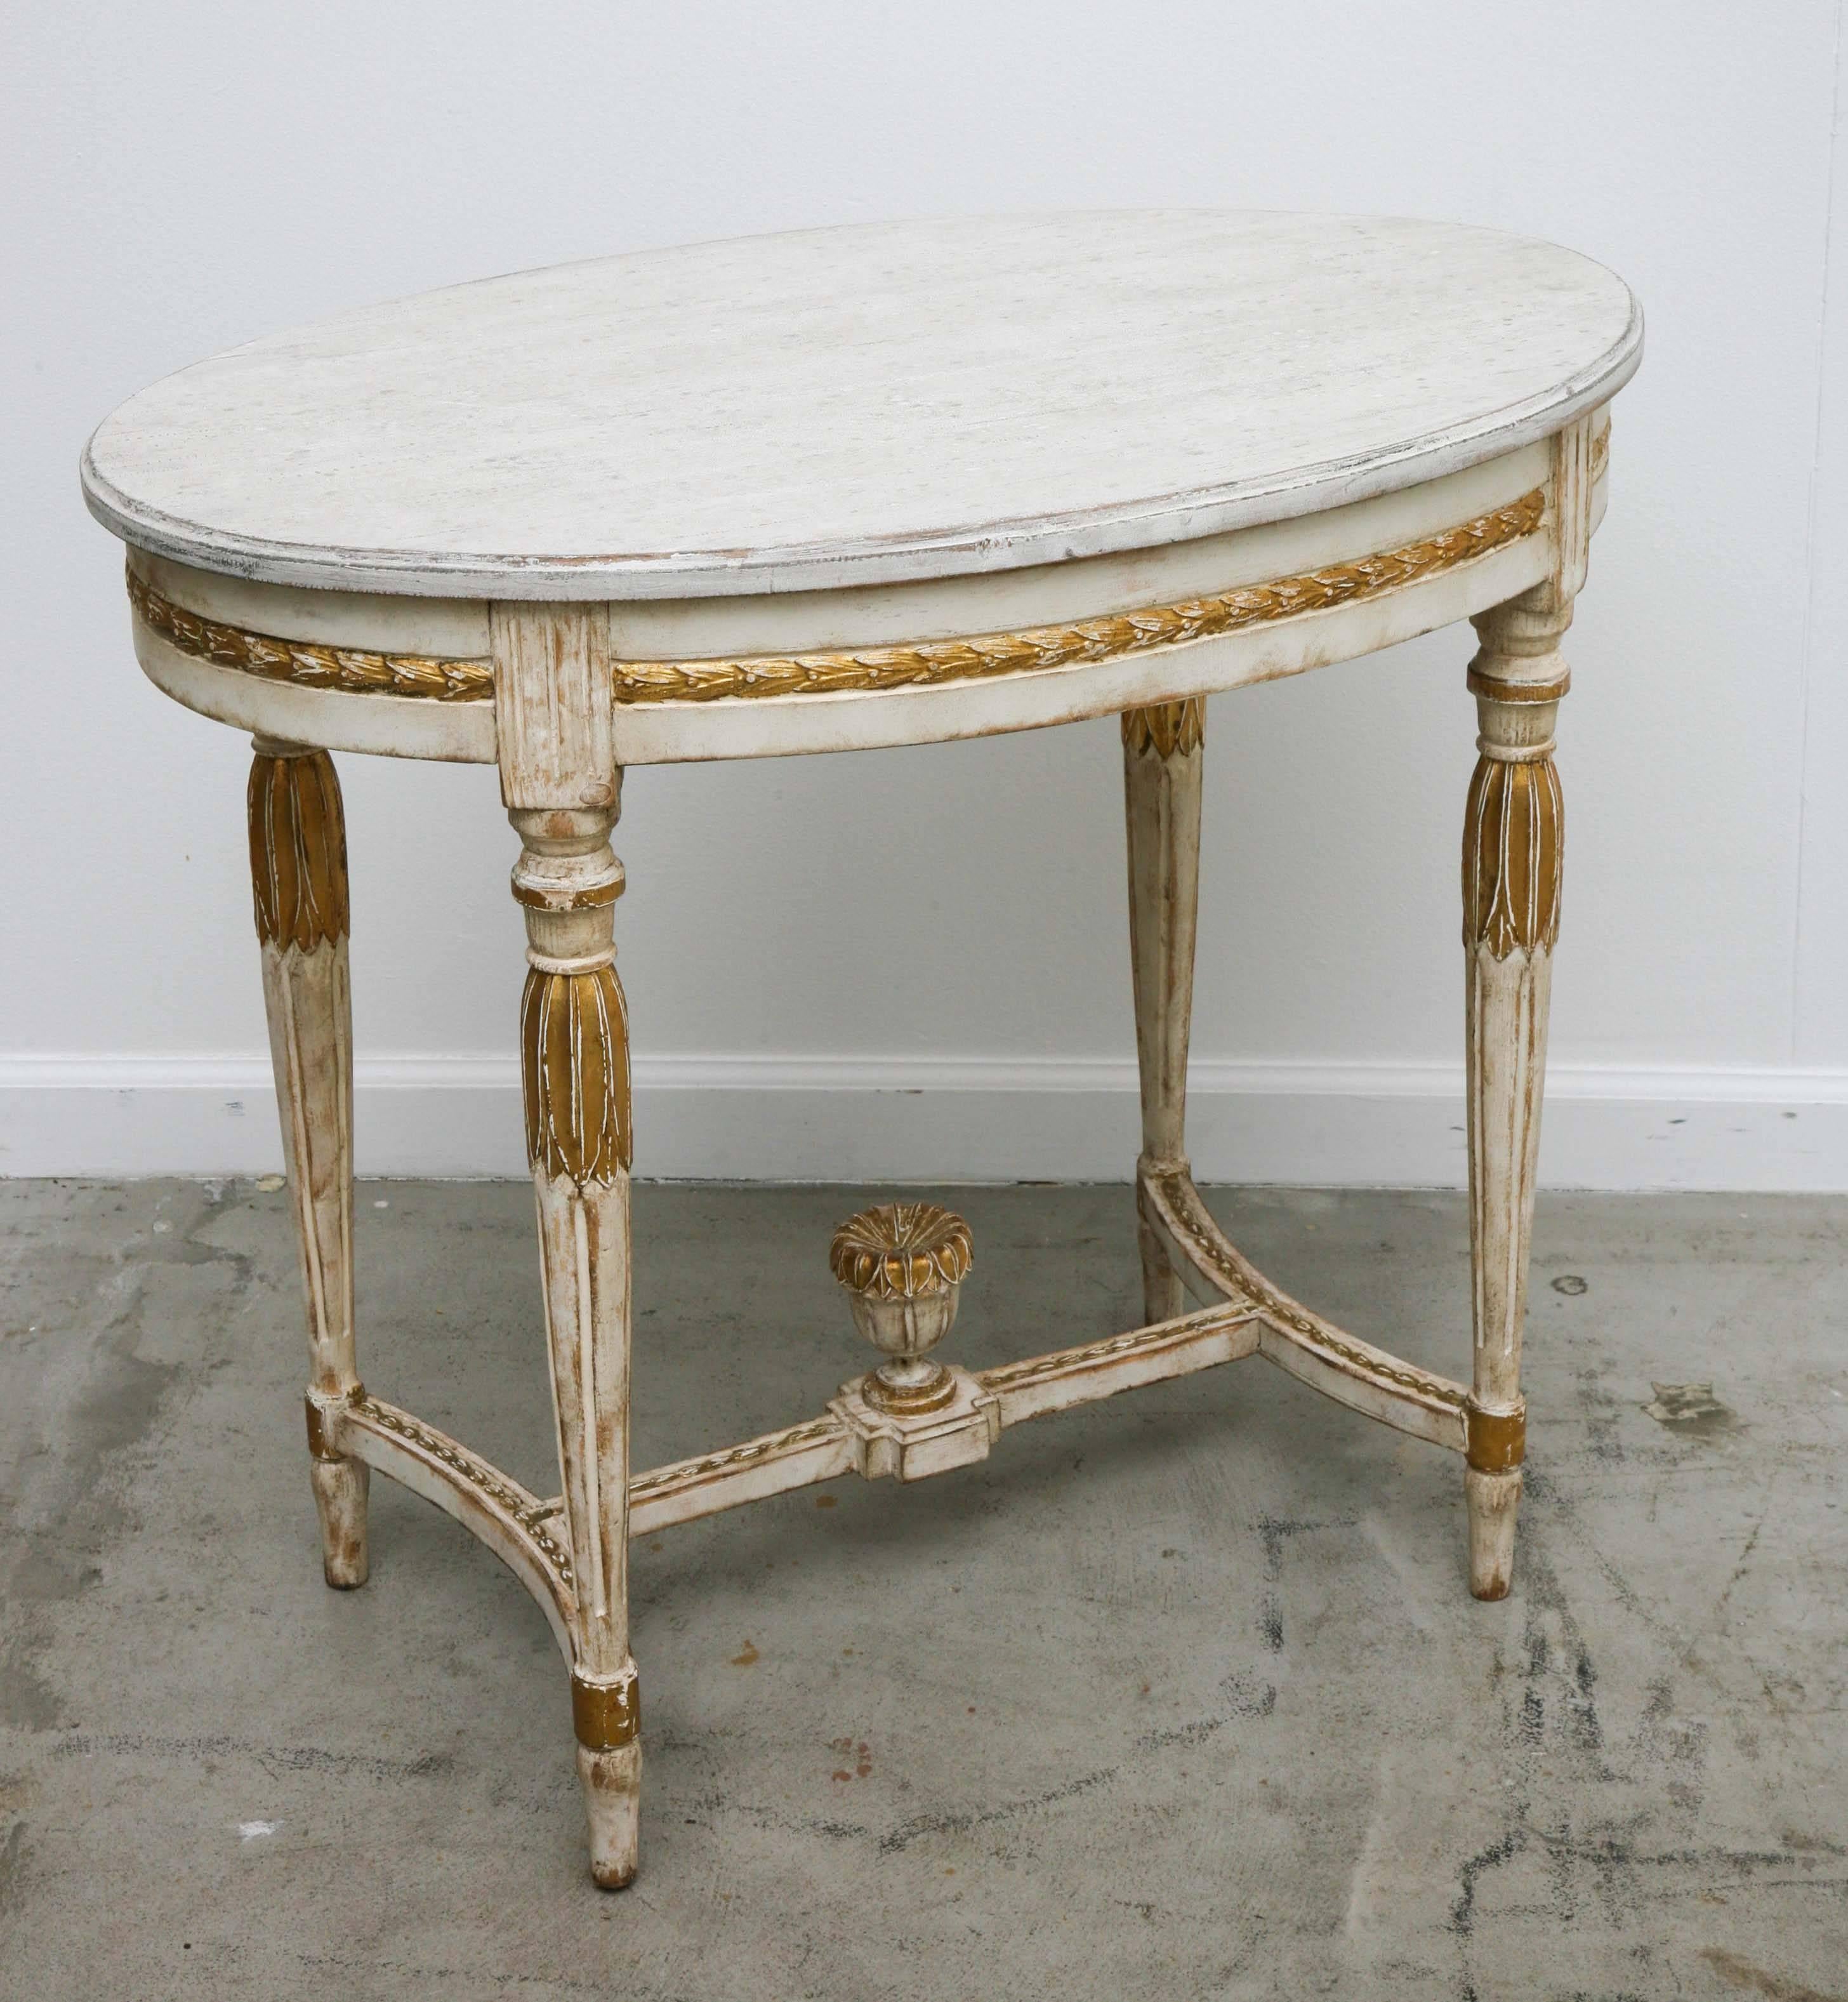 Antique Swedish Period Oval Table, Painted and Gilt Finish, 19th Century 4